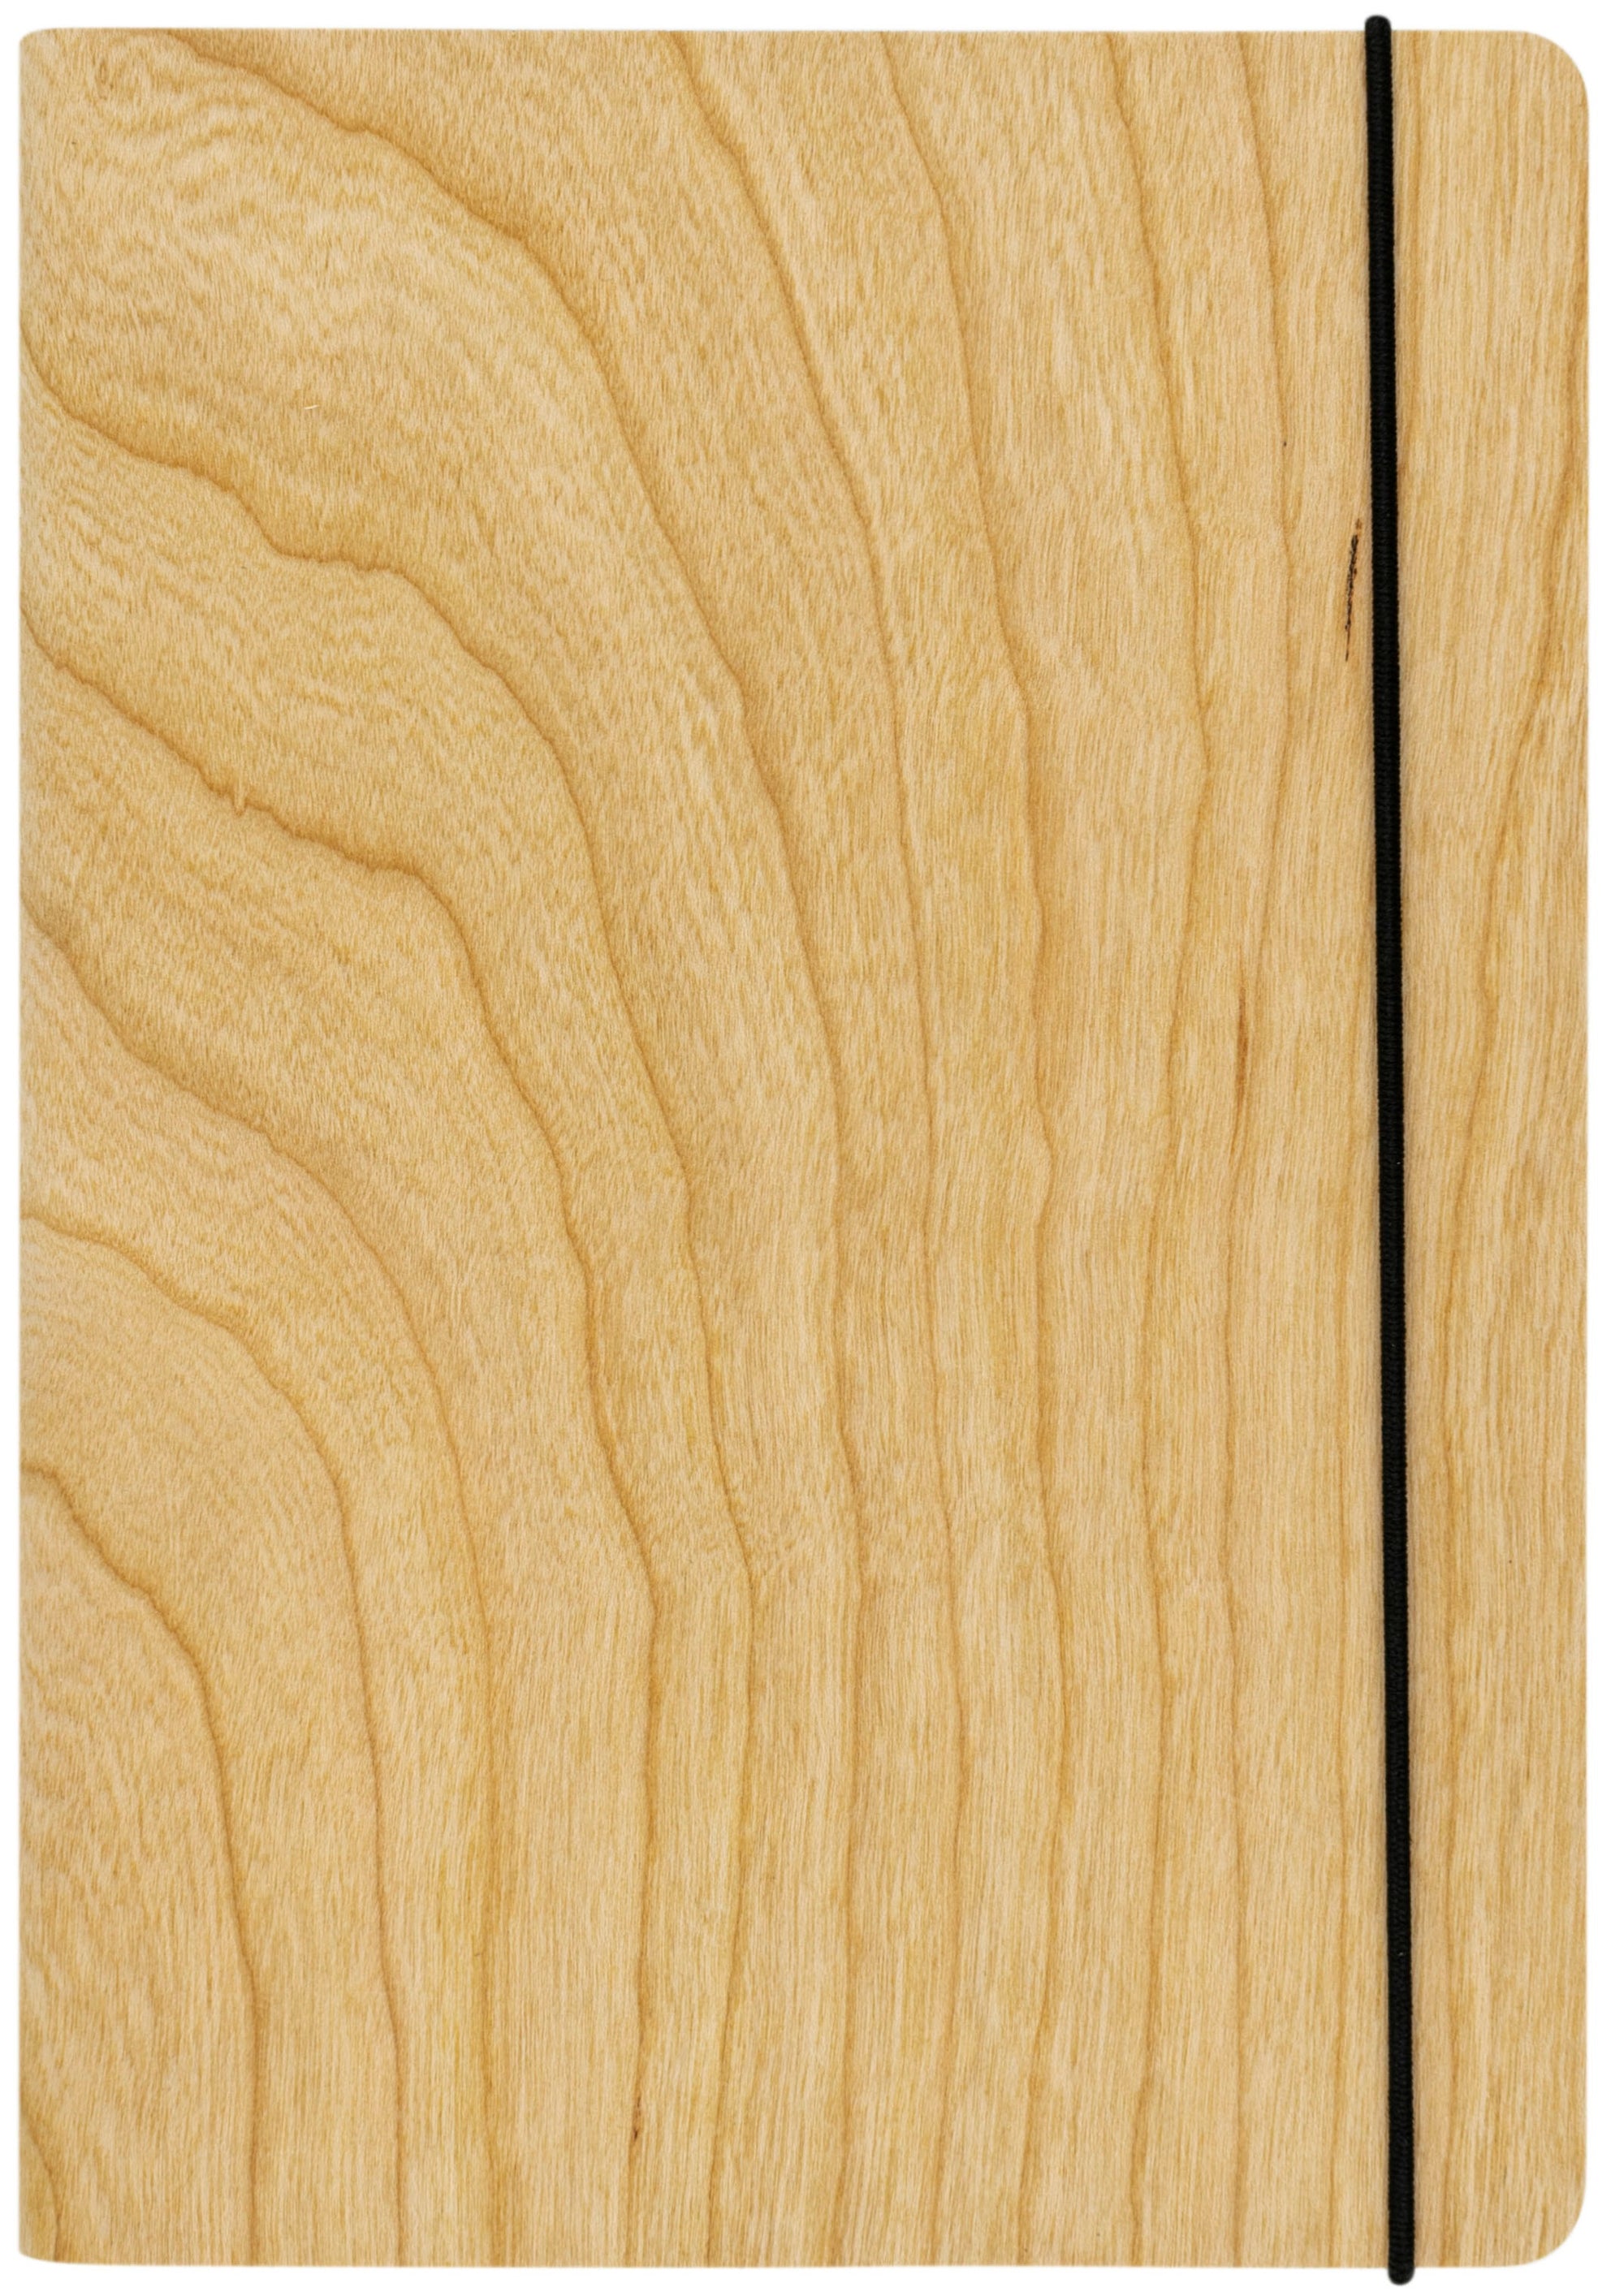 B6 Cherry Wood Cover Notepad (Blank)